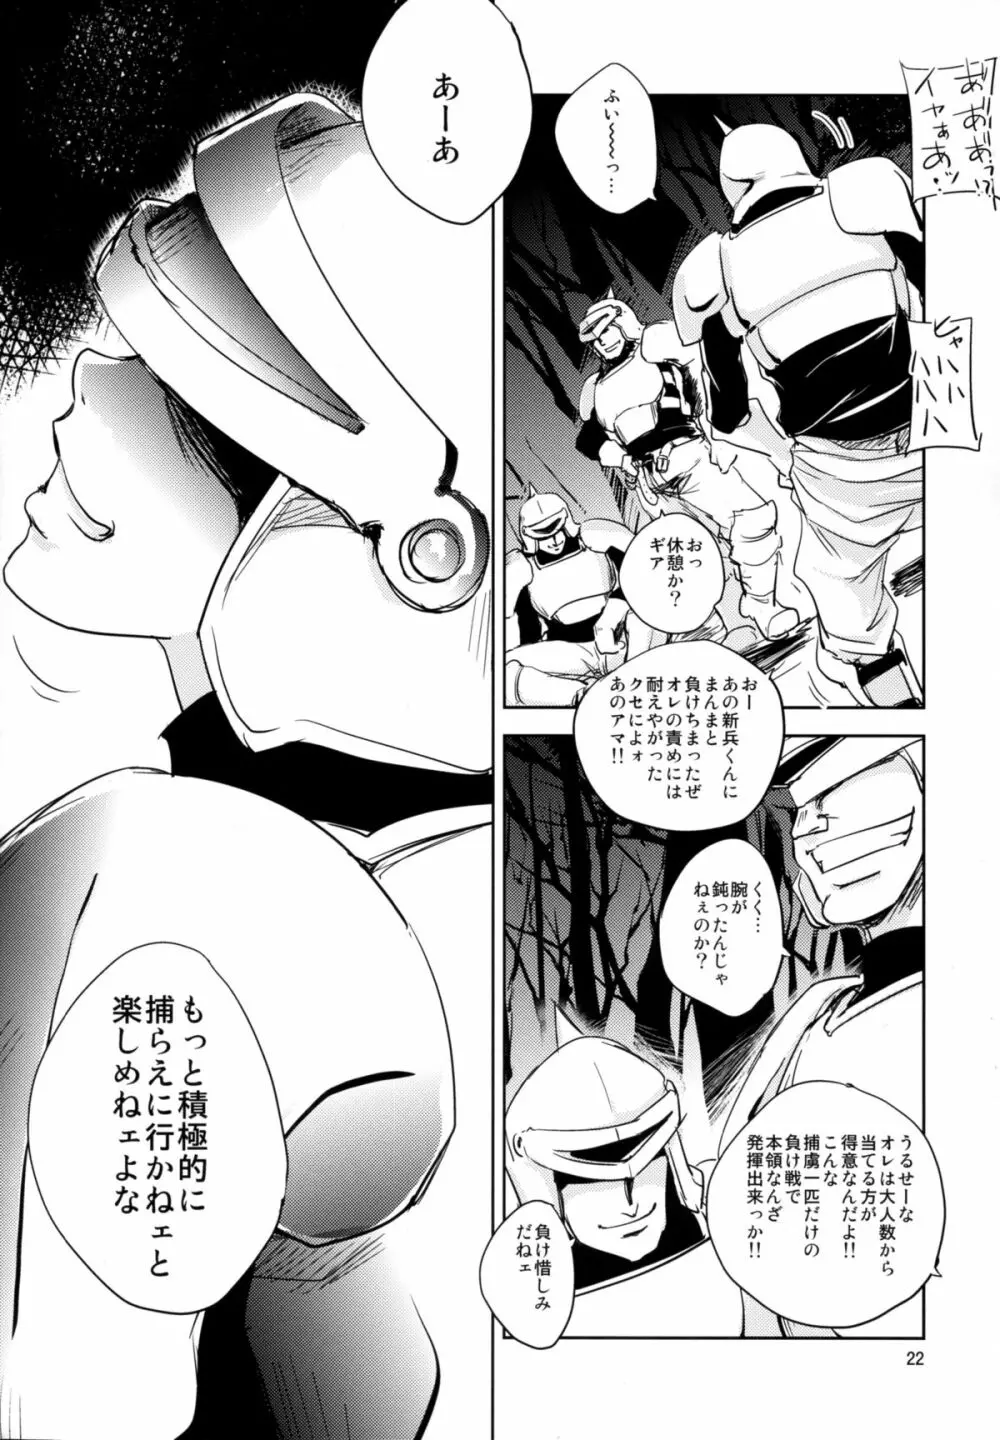 GRASSEN'S WAR ANOTHER STORY Ex #05 ノード侵攻 V Page.22